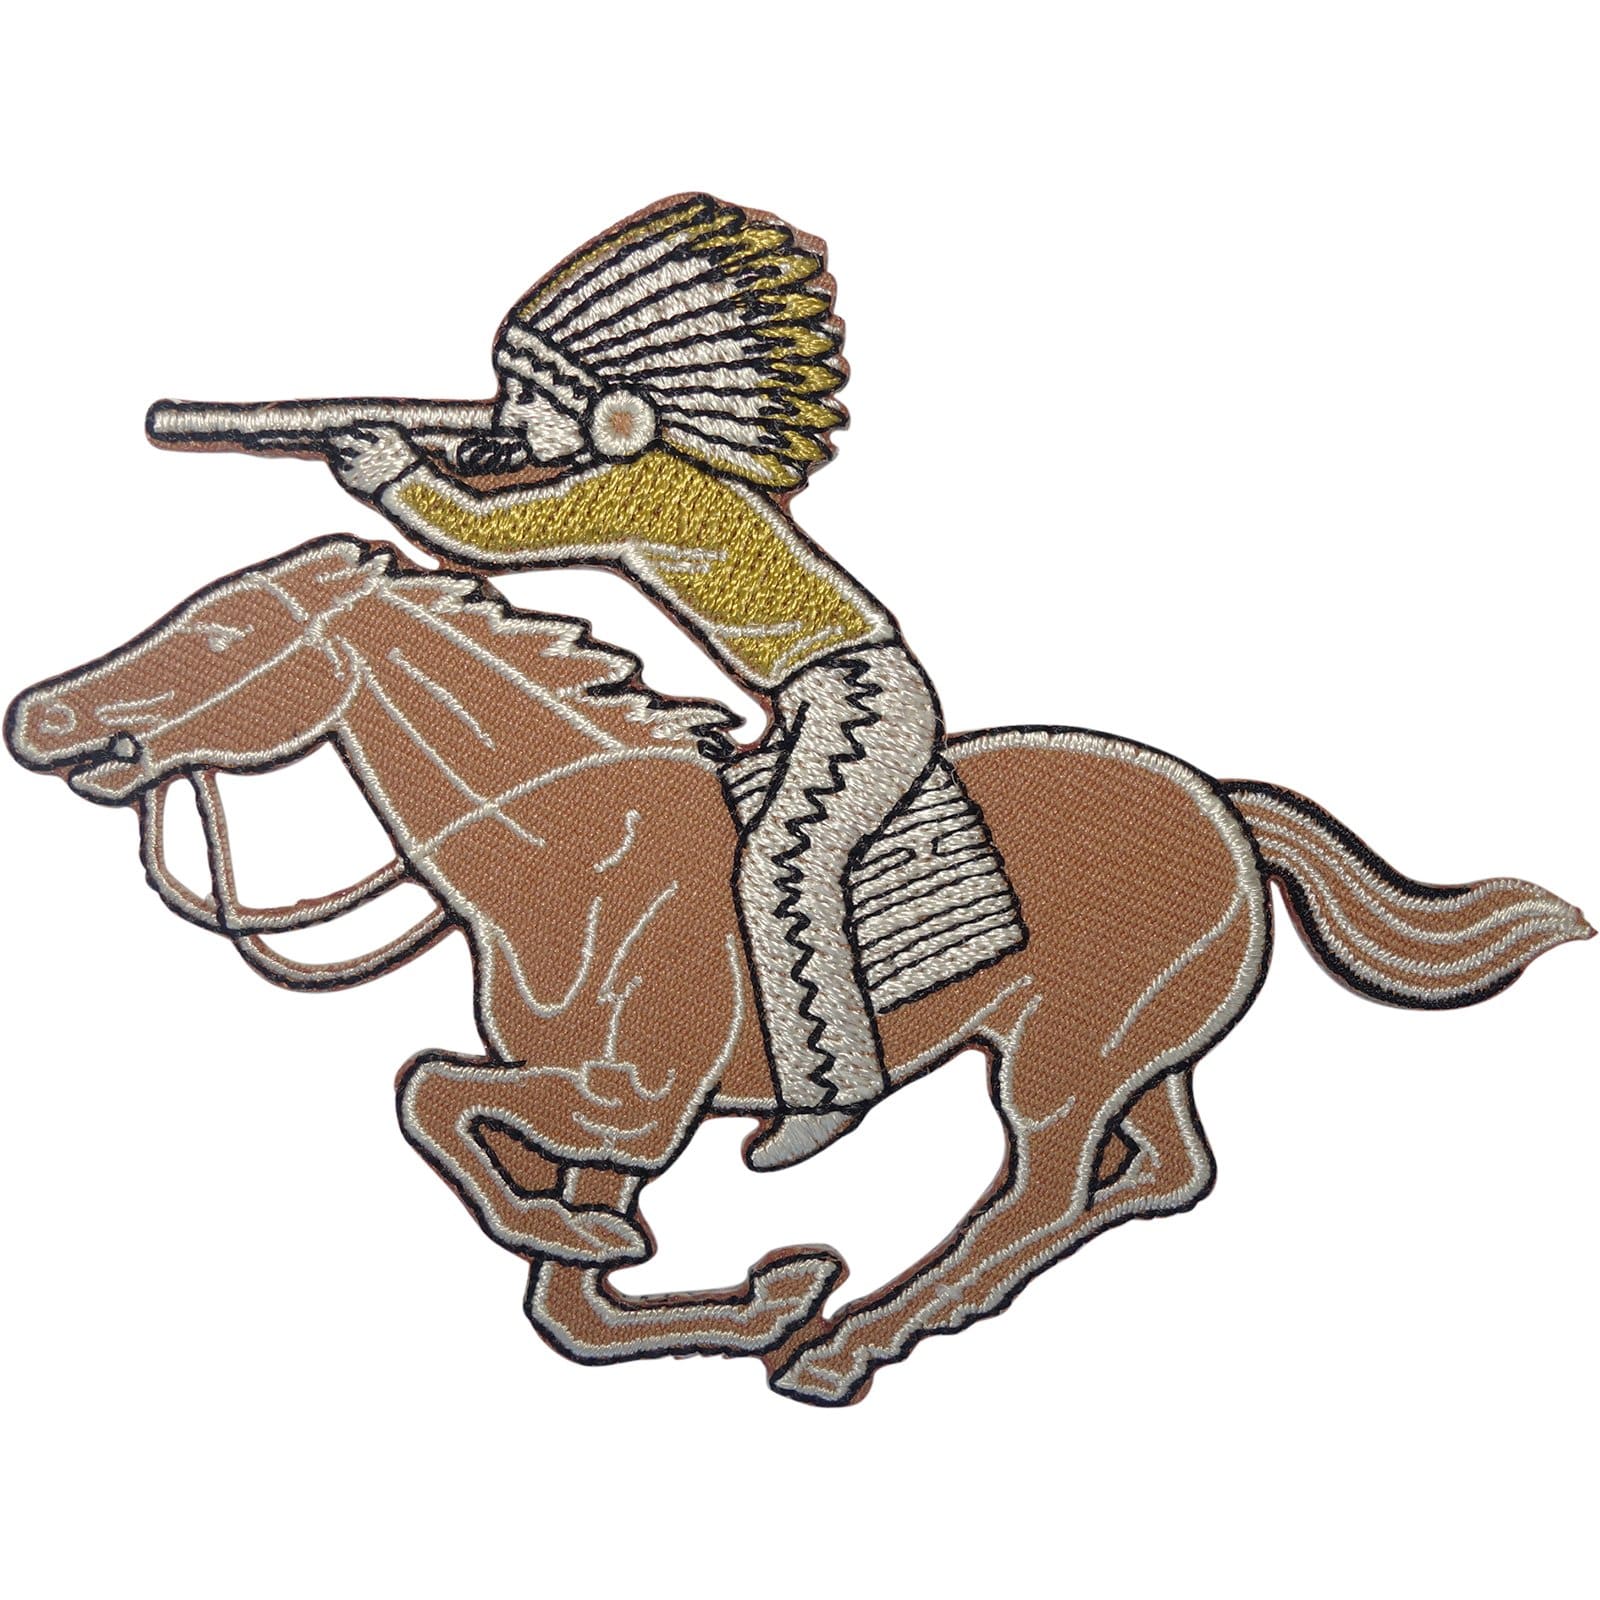 Indian With Gun Shooting On Horse Patch Iron On Sew On Clothes Embroidered Badge